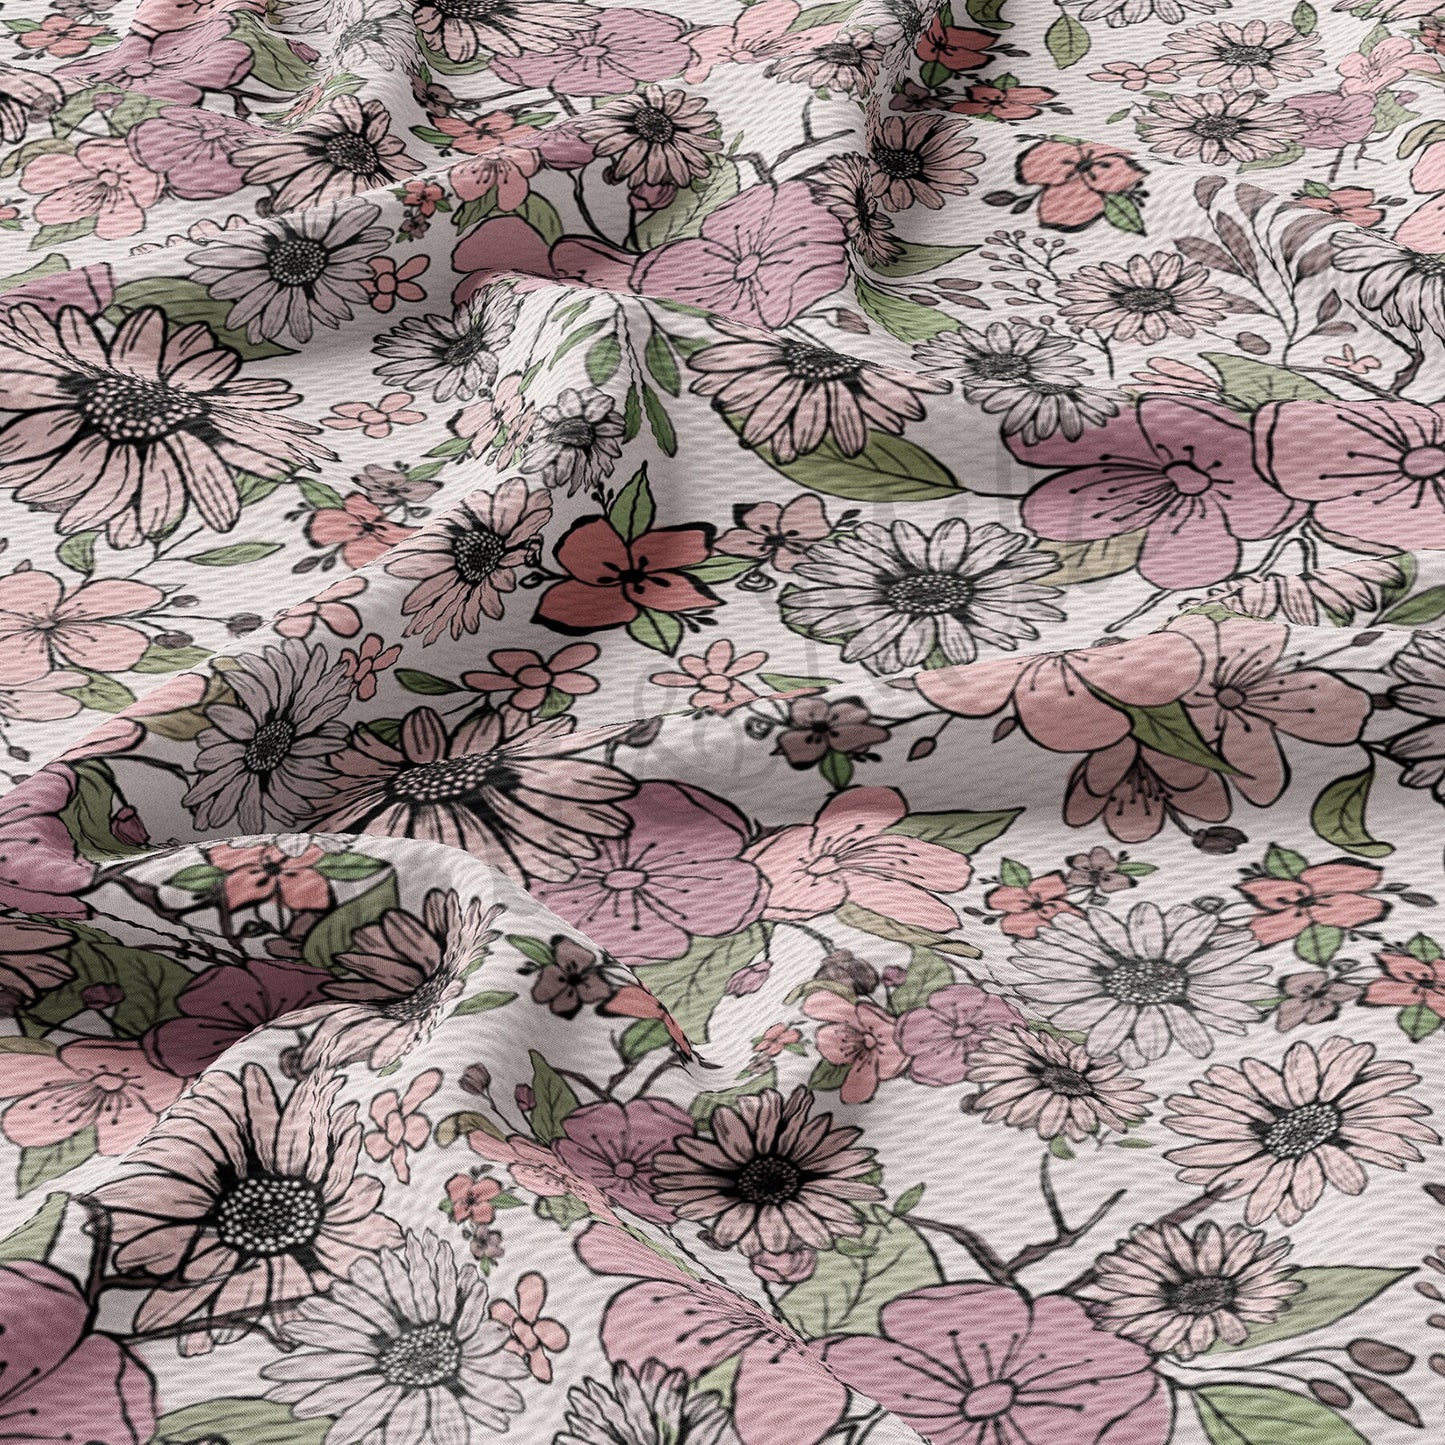 Floral Printed Liverpool Bullet Textured Fabric by the yard AA1617